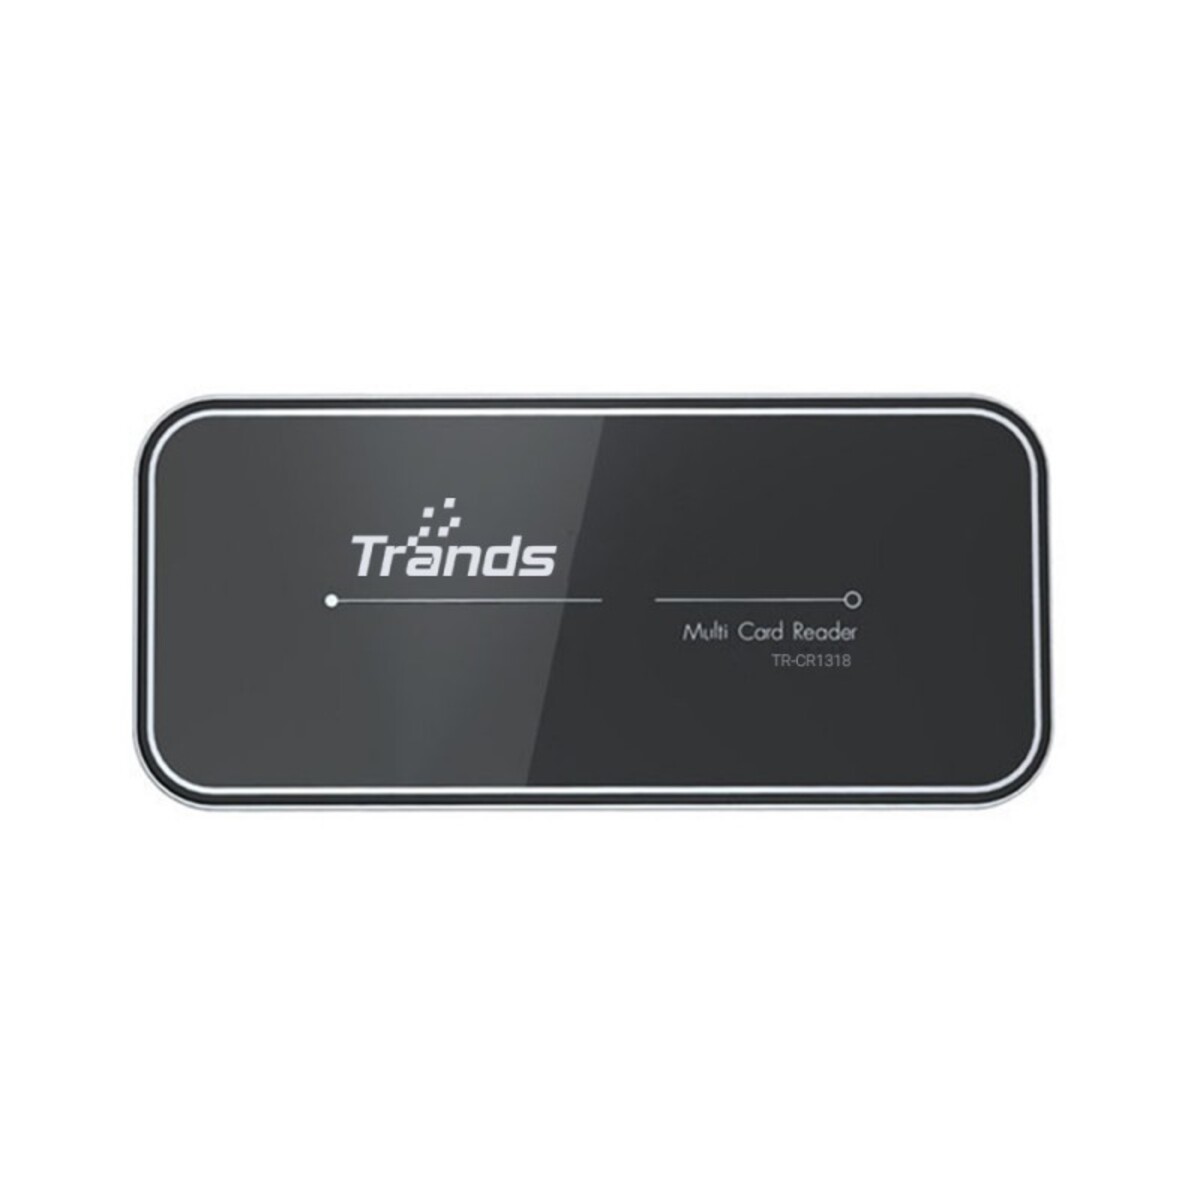 Trands External Multi 2.0 Card Reader With Micro USB Cable CR1318